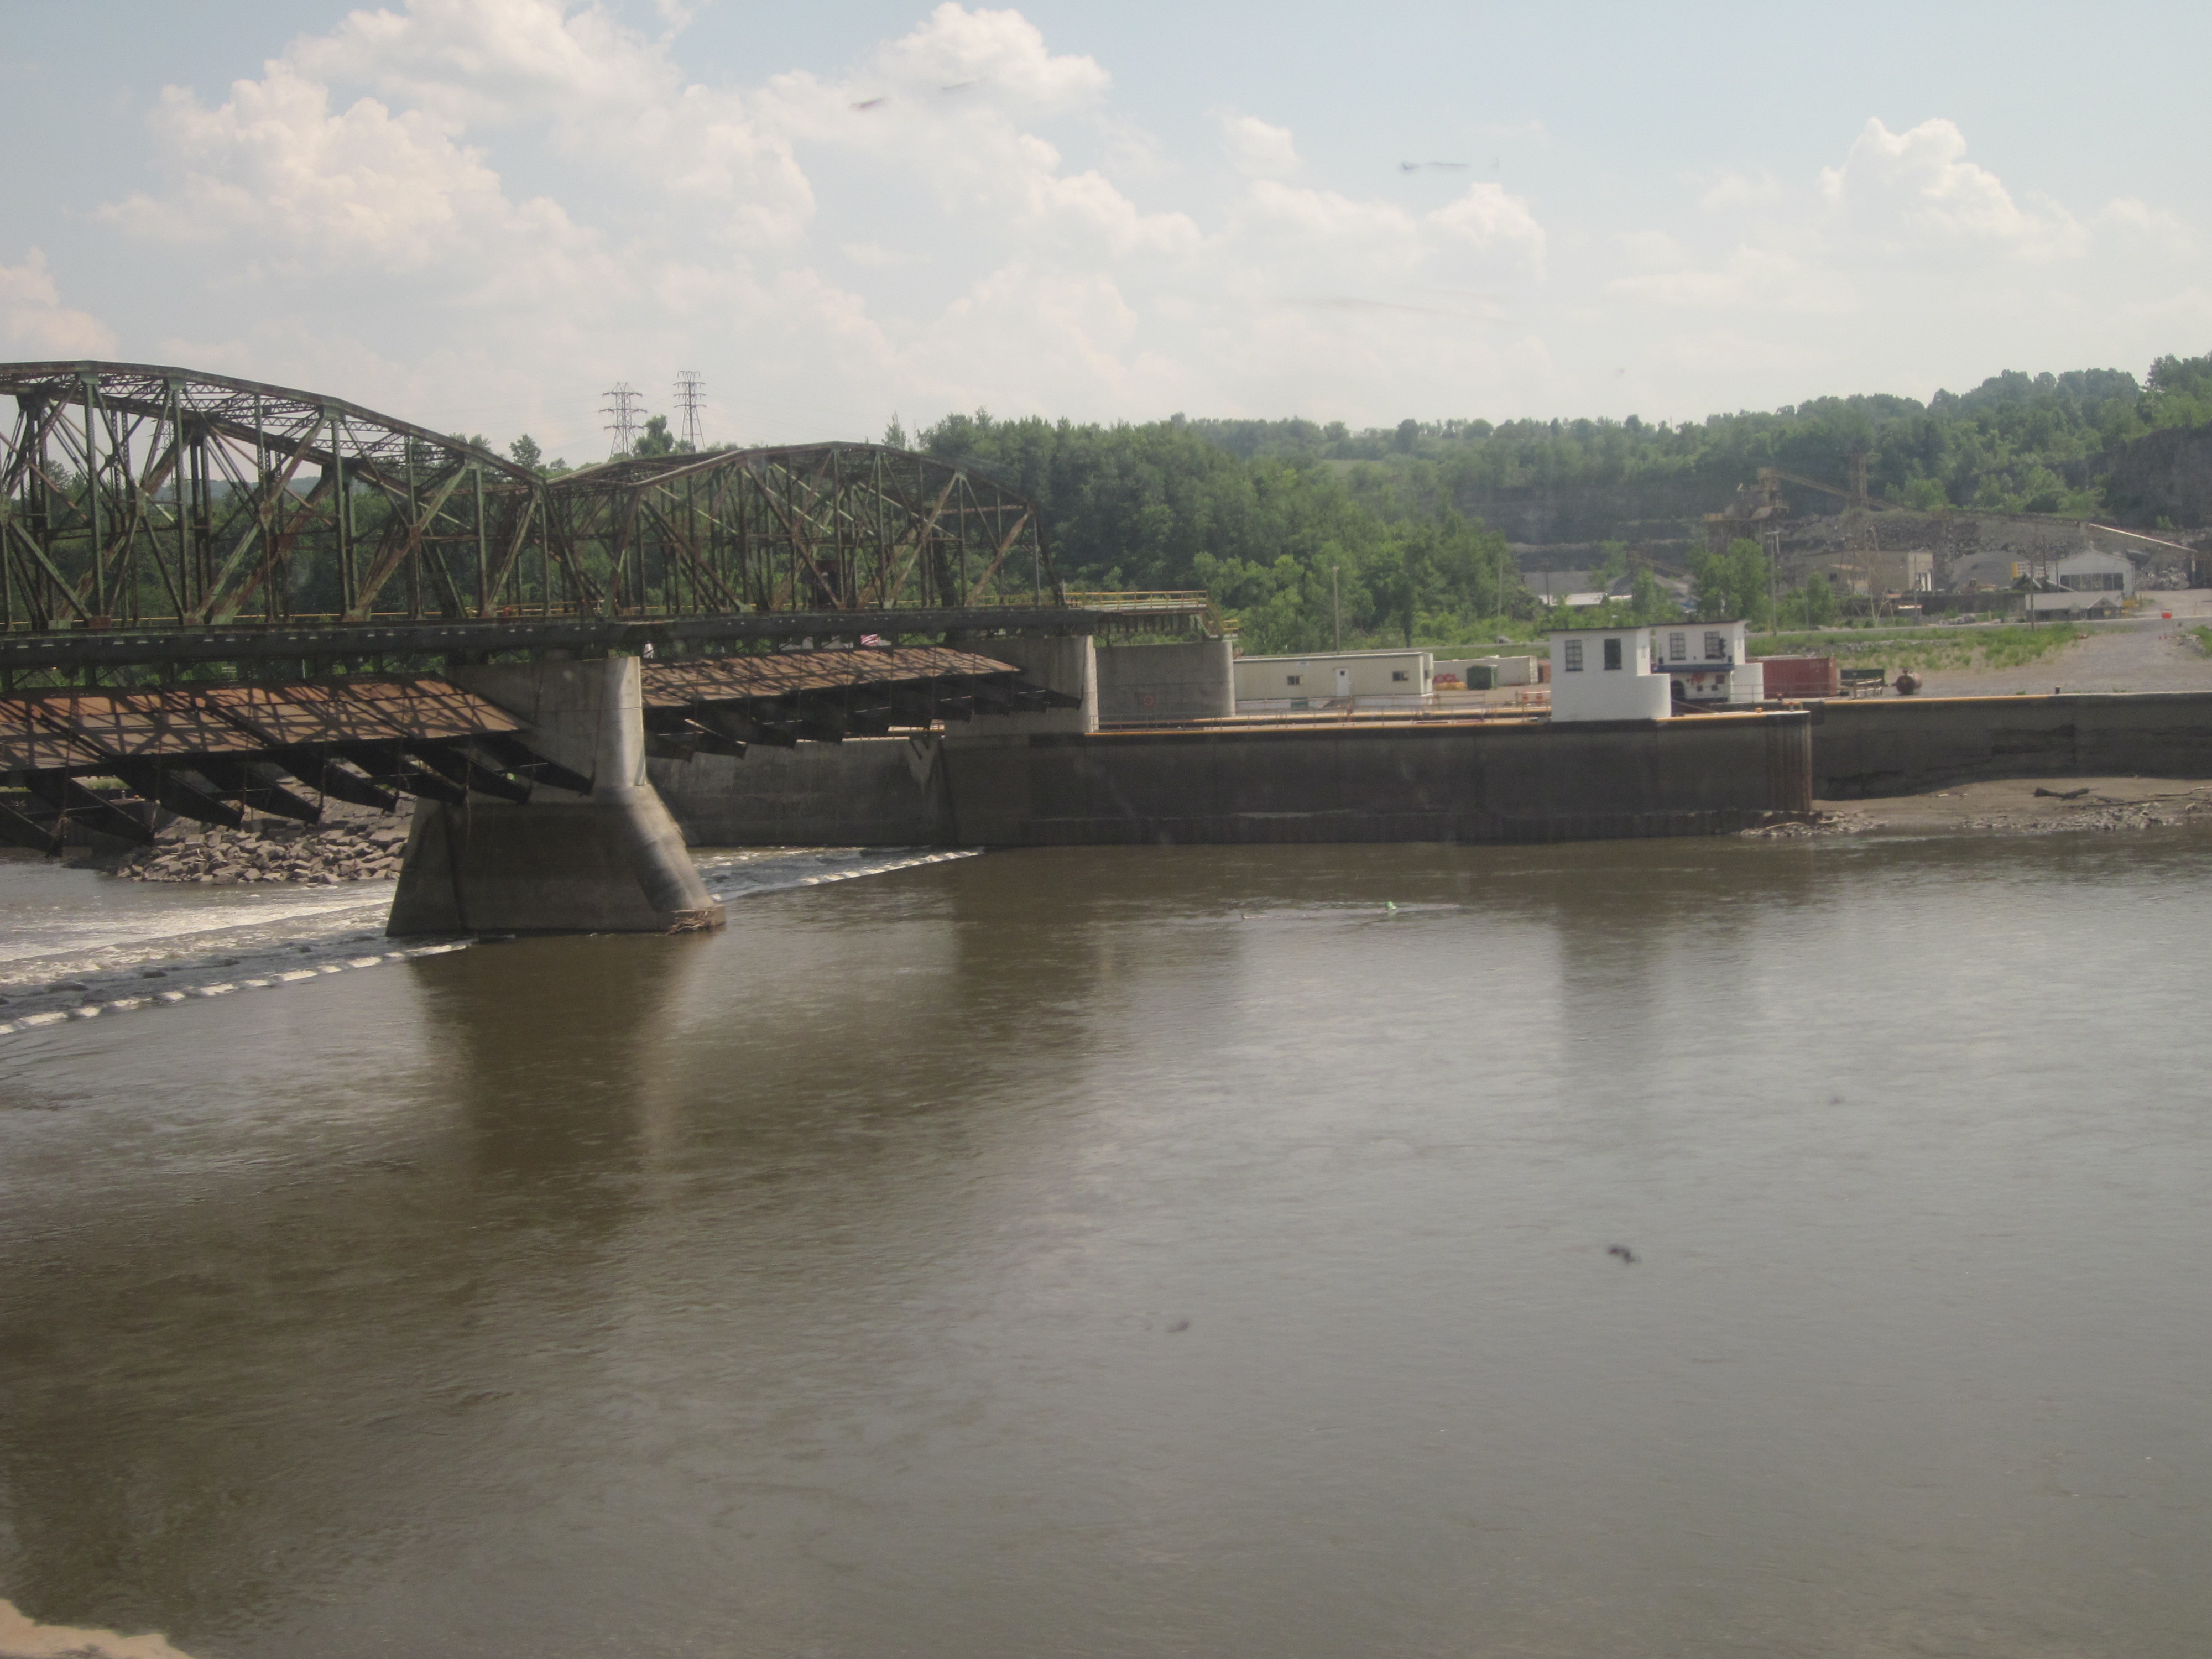 A lock on the Erie Canal